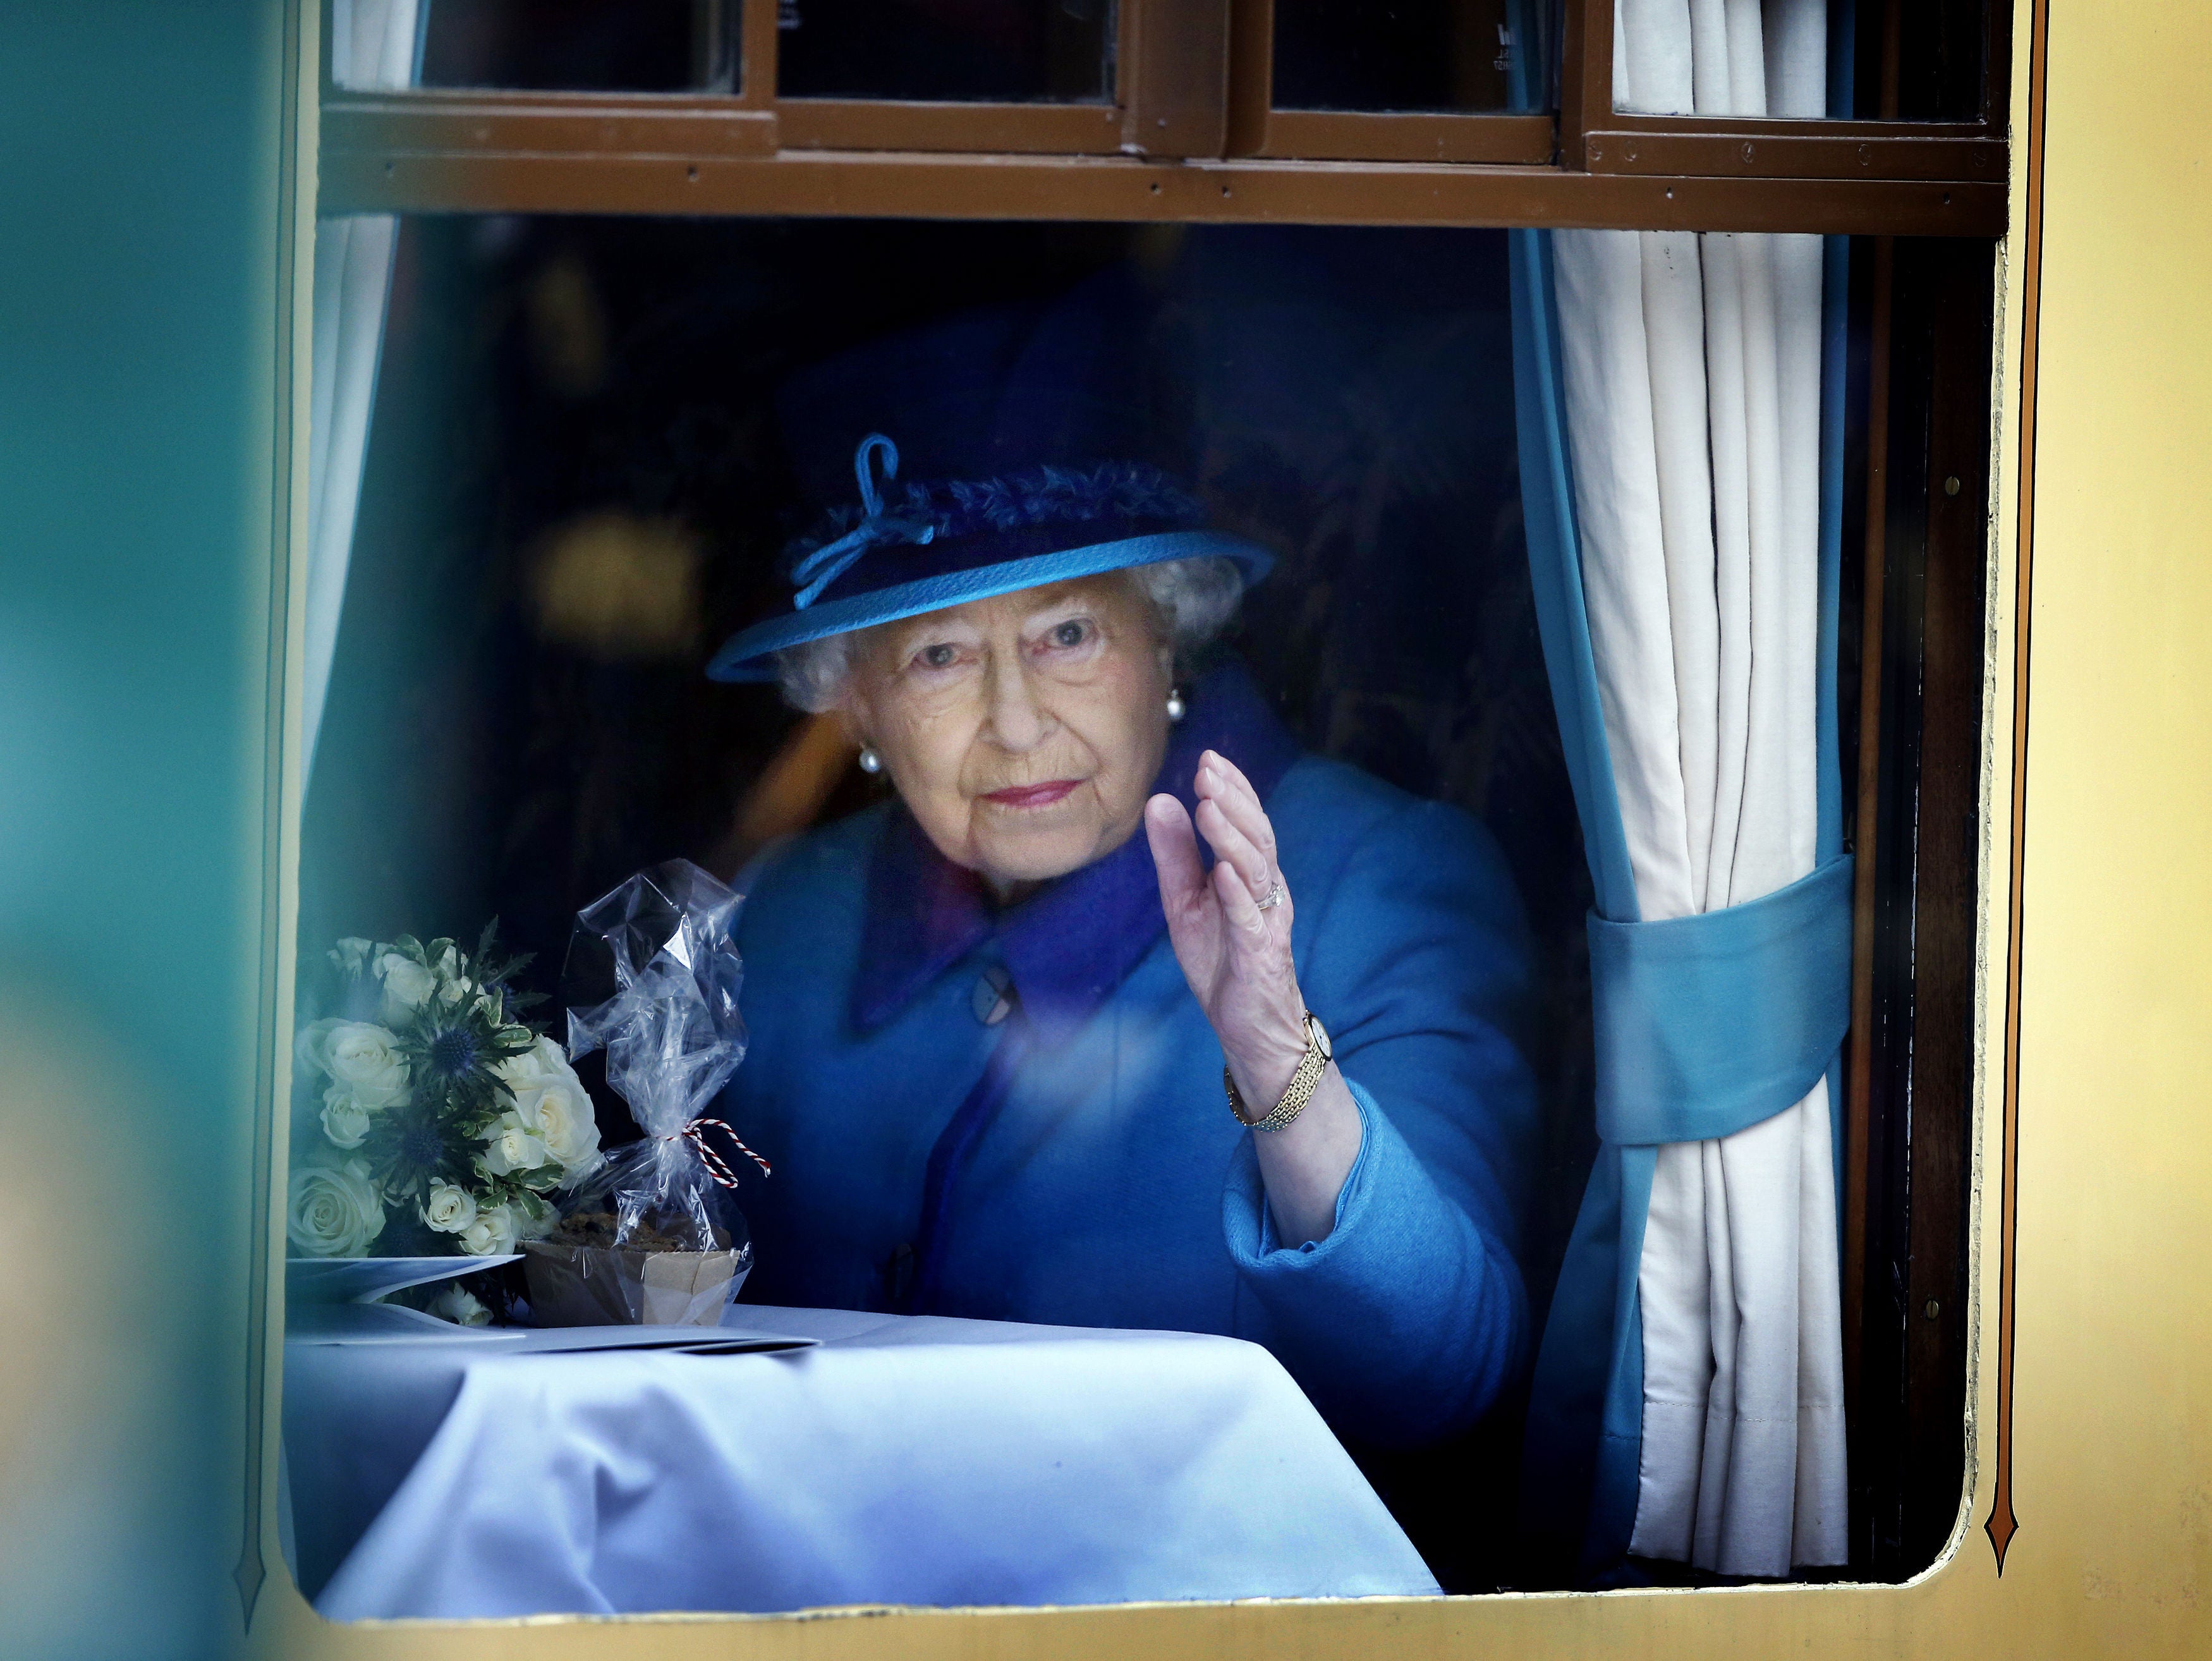 Queen Elizabeth II has died at the age of 96 (Danny Lawson/PA)